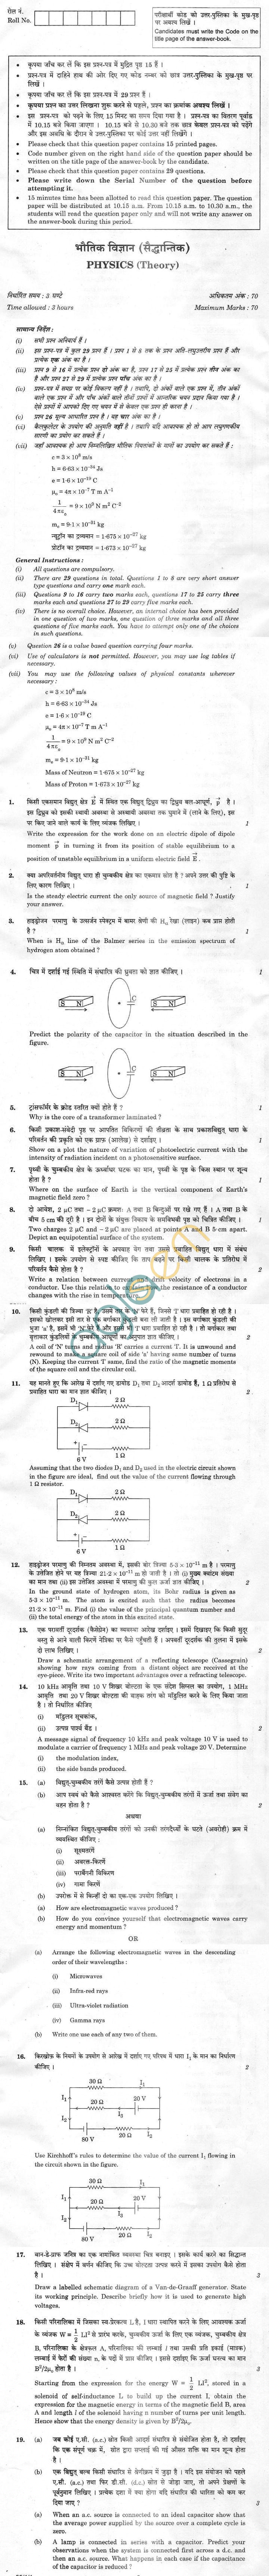 CBSE Compartment Exam 2013 Class XII Question Paper - Physics